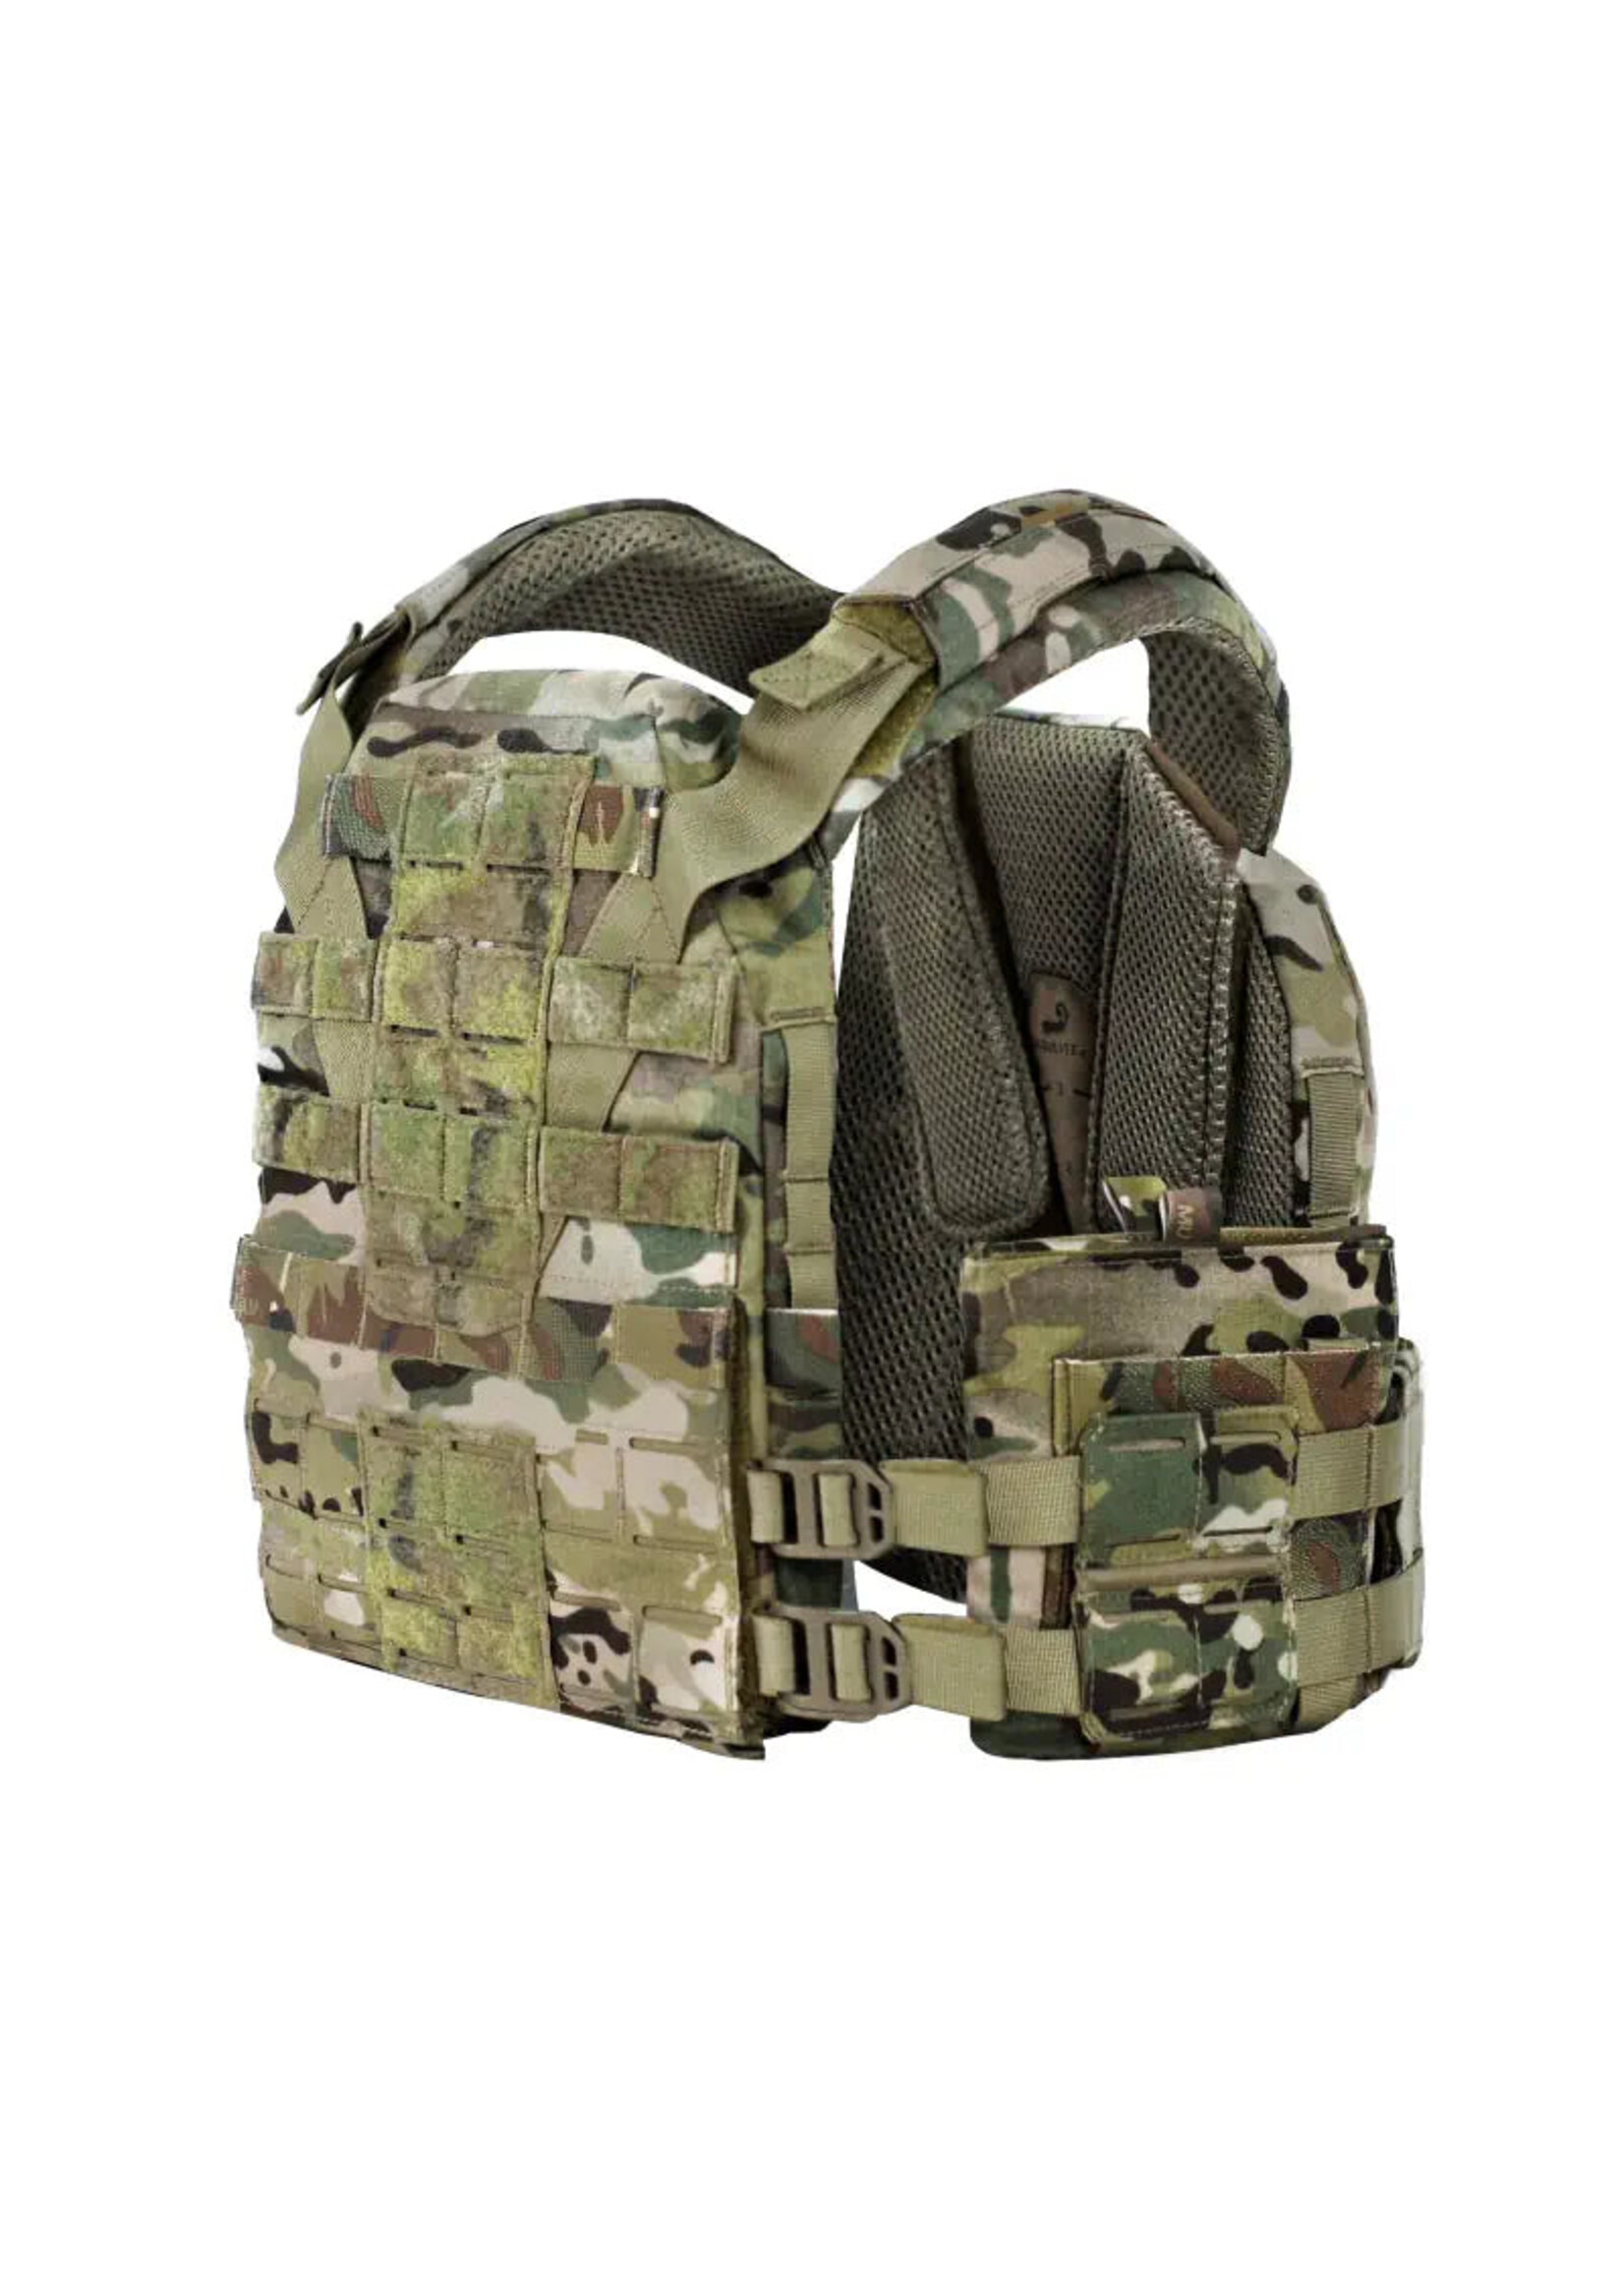 AGILITE FLANK SIDE PLATE CARRIERS